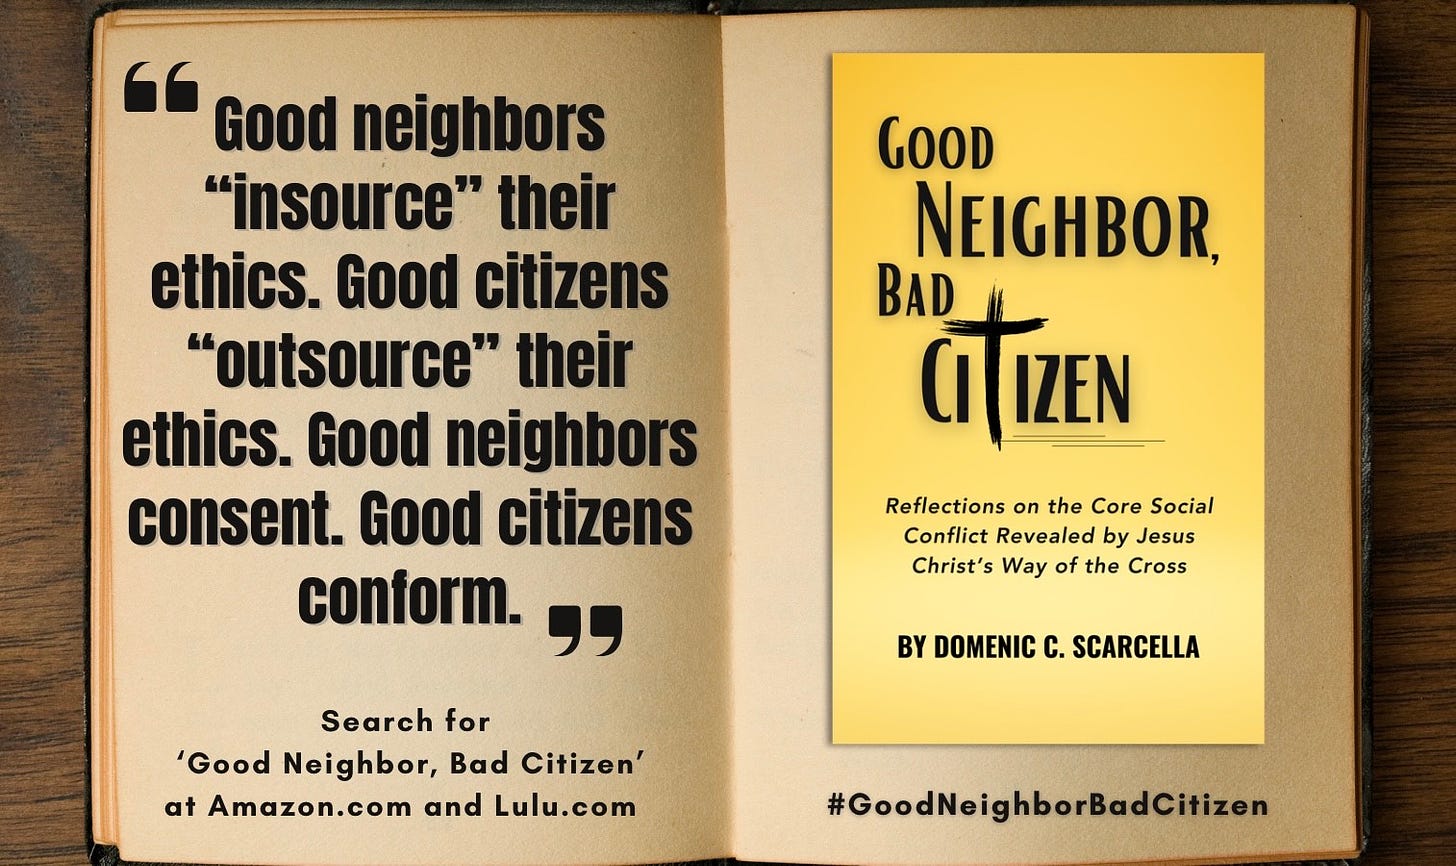 Front cover of the book 'Good Neighbor, Bad Citizen' next to a quote from the book that says, "Good neighbors 'insource' their ethics.  Good citizens 'outsource' their ethics.  Good neighbors consent.  Good citizens conform."  To read more, search for the book 'Good Neighbor, Bad Citizen' at Amazon.com, BarnesAndNoble.com, and Lulu.com.  And continue the conversation with the blog 'Good Neighbor, Bad Citizen' at Substack.com